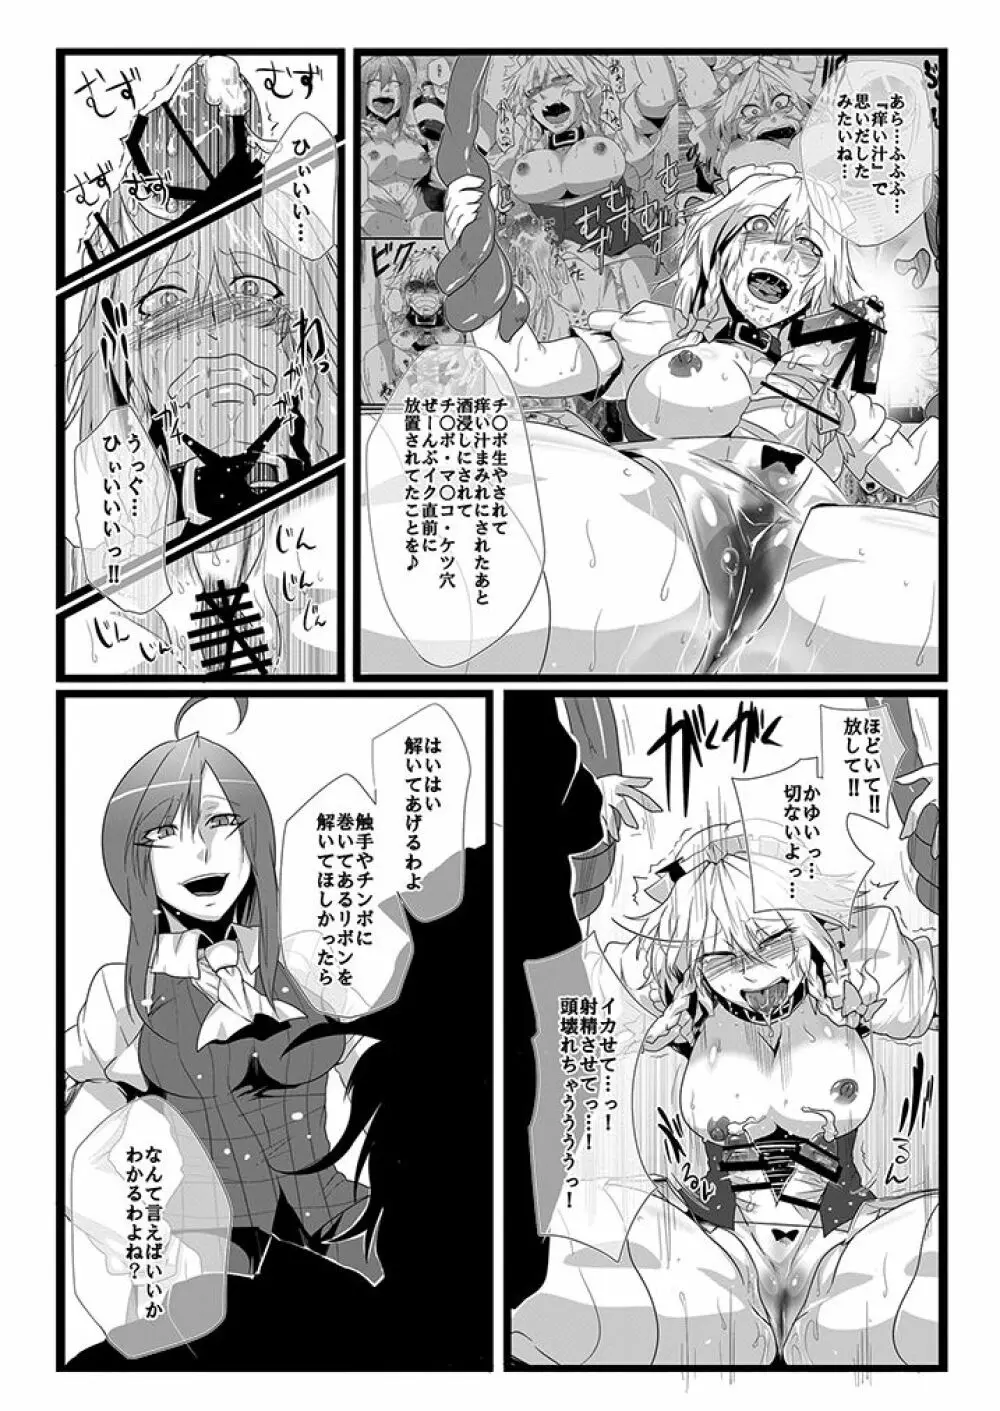 SAKUYA MAID in HEAVEN/ALL IN 1 - page252